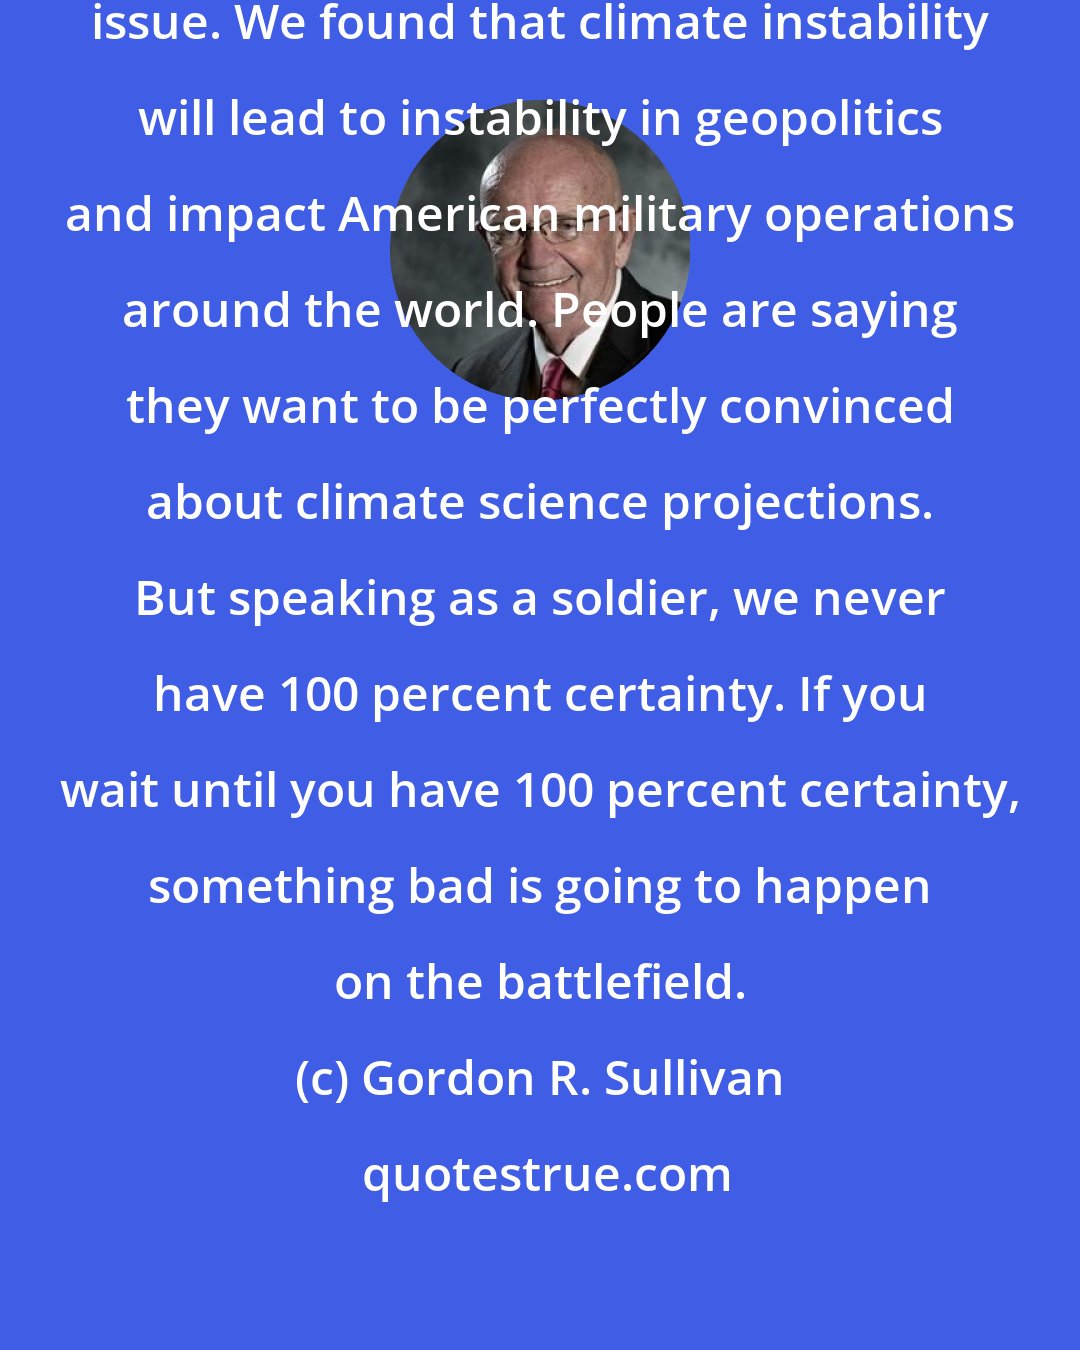 Gordon R. Sullivan: Climate Change is a national security issue. We found that climate instability will lead to instability in geopolitics and impact American military operations around the world. People are saying they want to be perfectly convinced about climate science projections. But speaking as a soldier, we never have 100 percent certainty. If you wait until you have 100 percent certainty, something bad is going to happen on the battlefield.